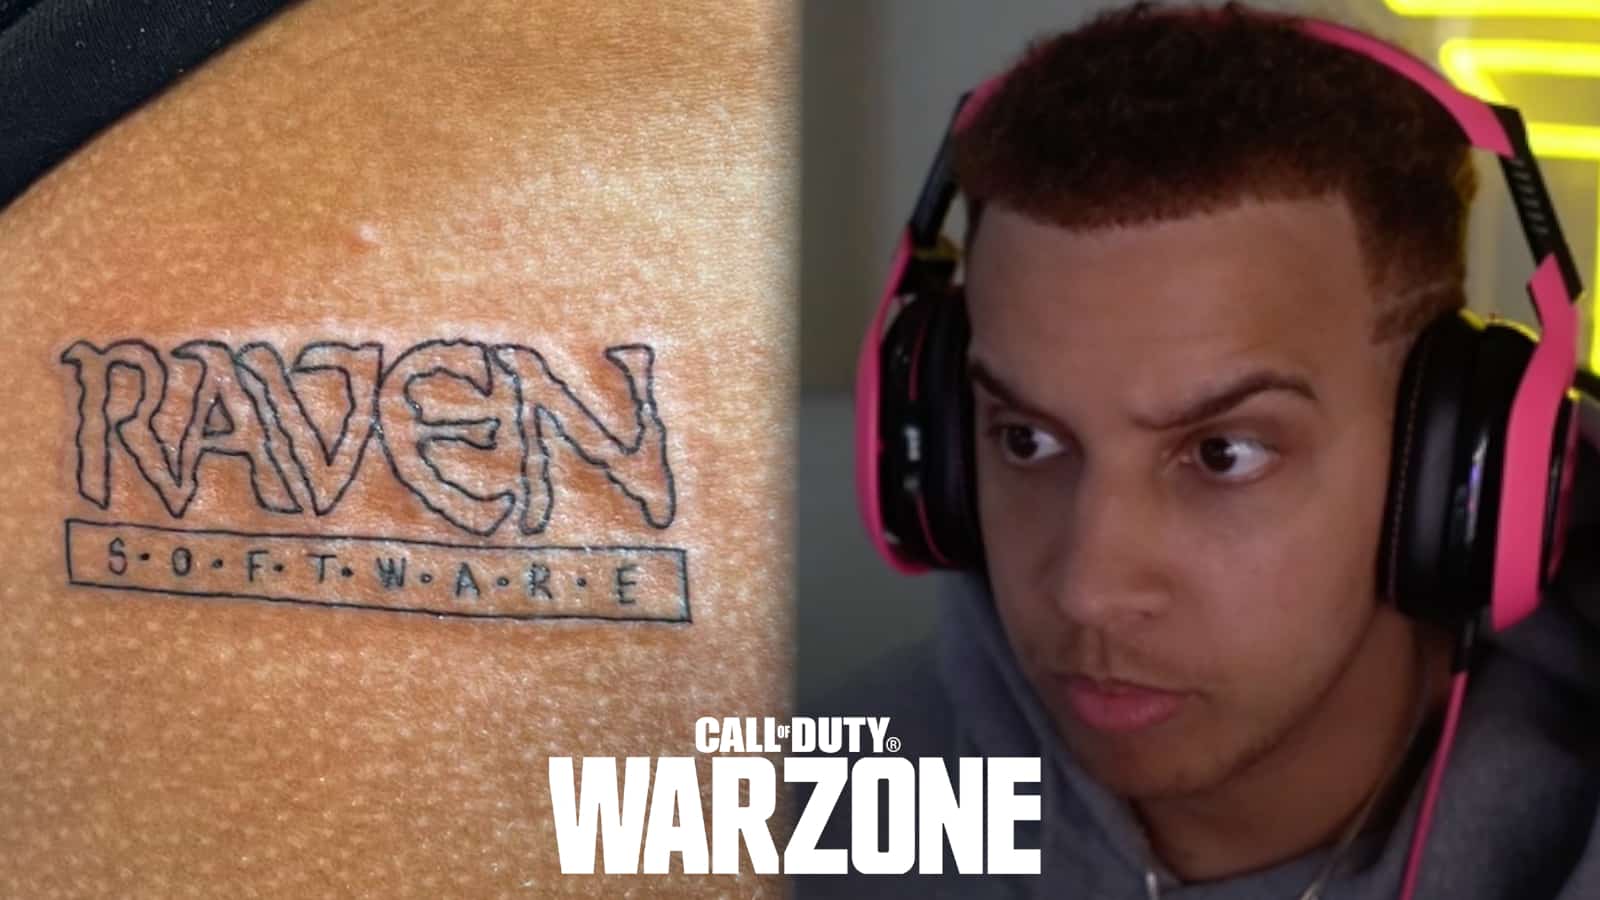 Swagg makes another wild Warzone butt tattoo promise for one simple change